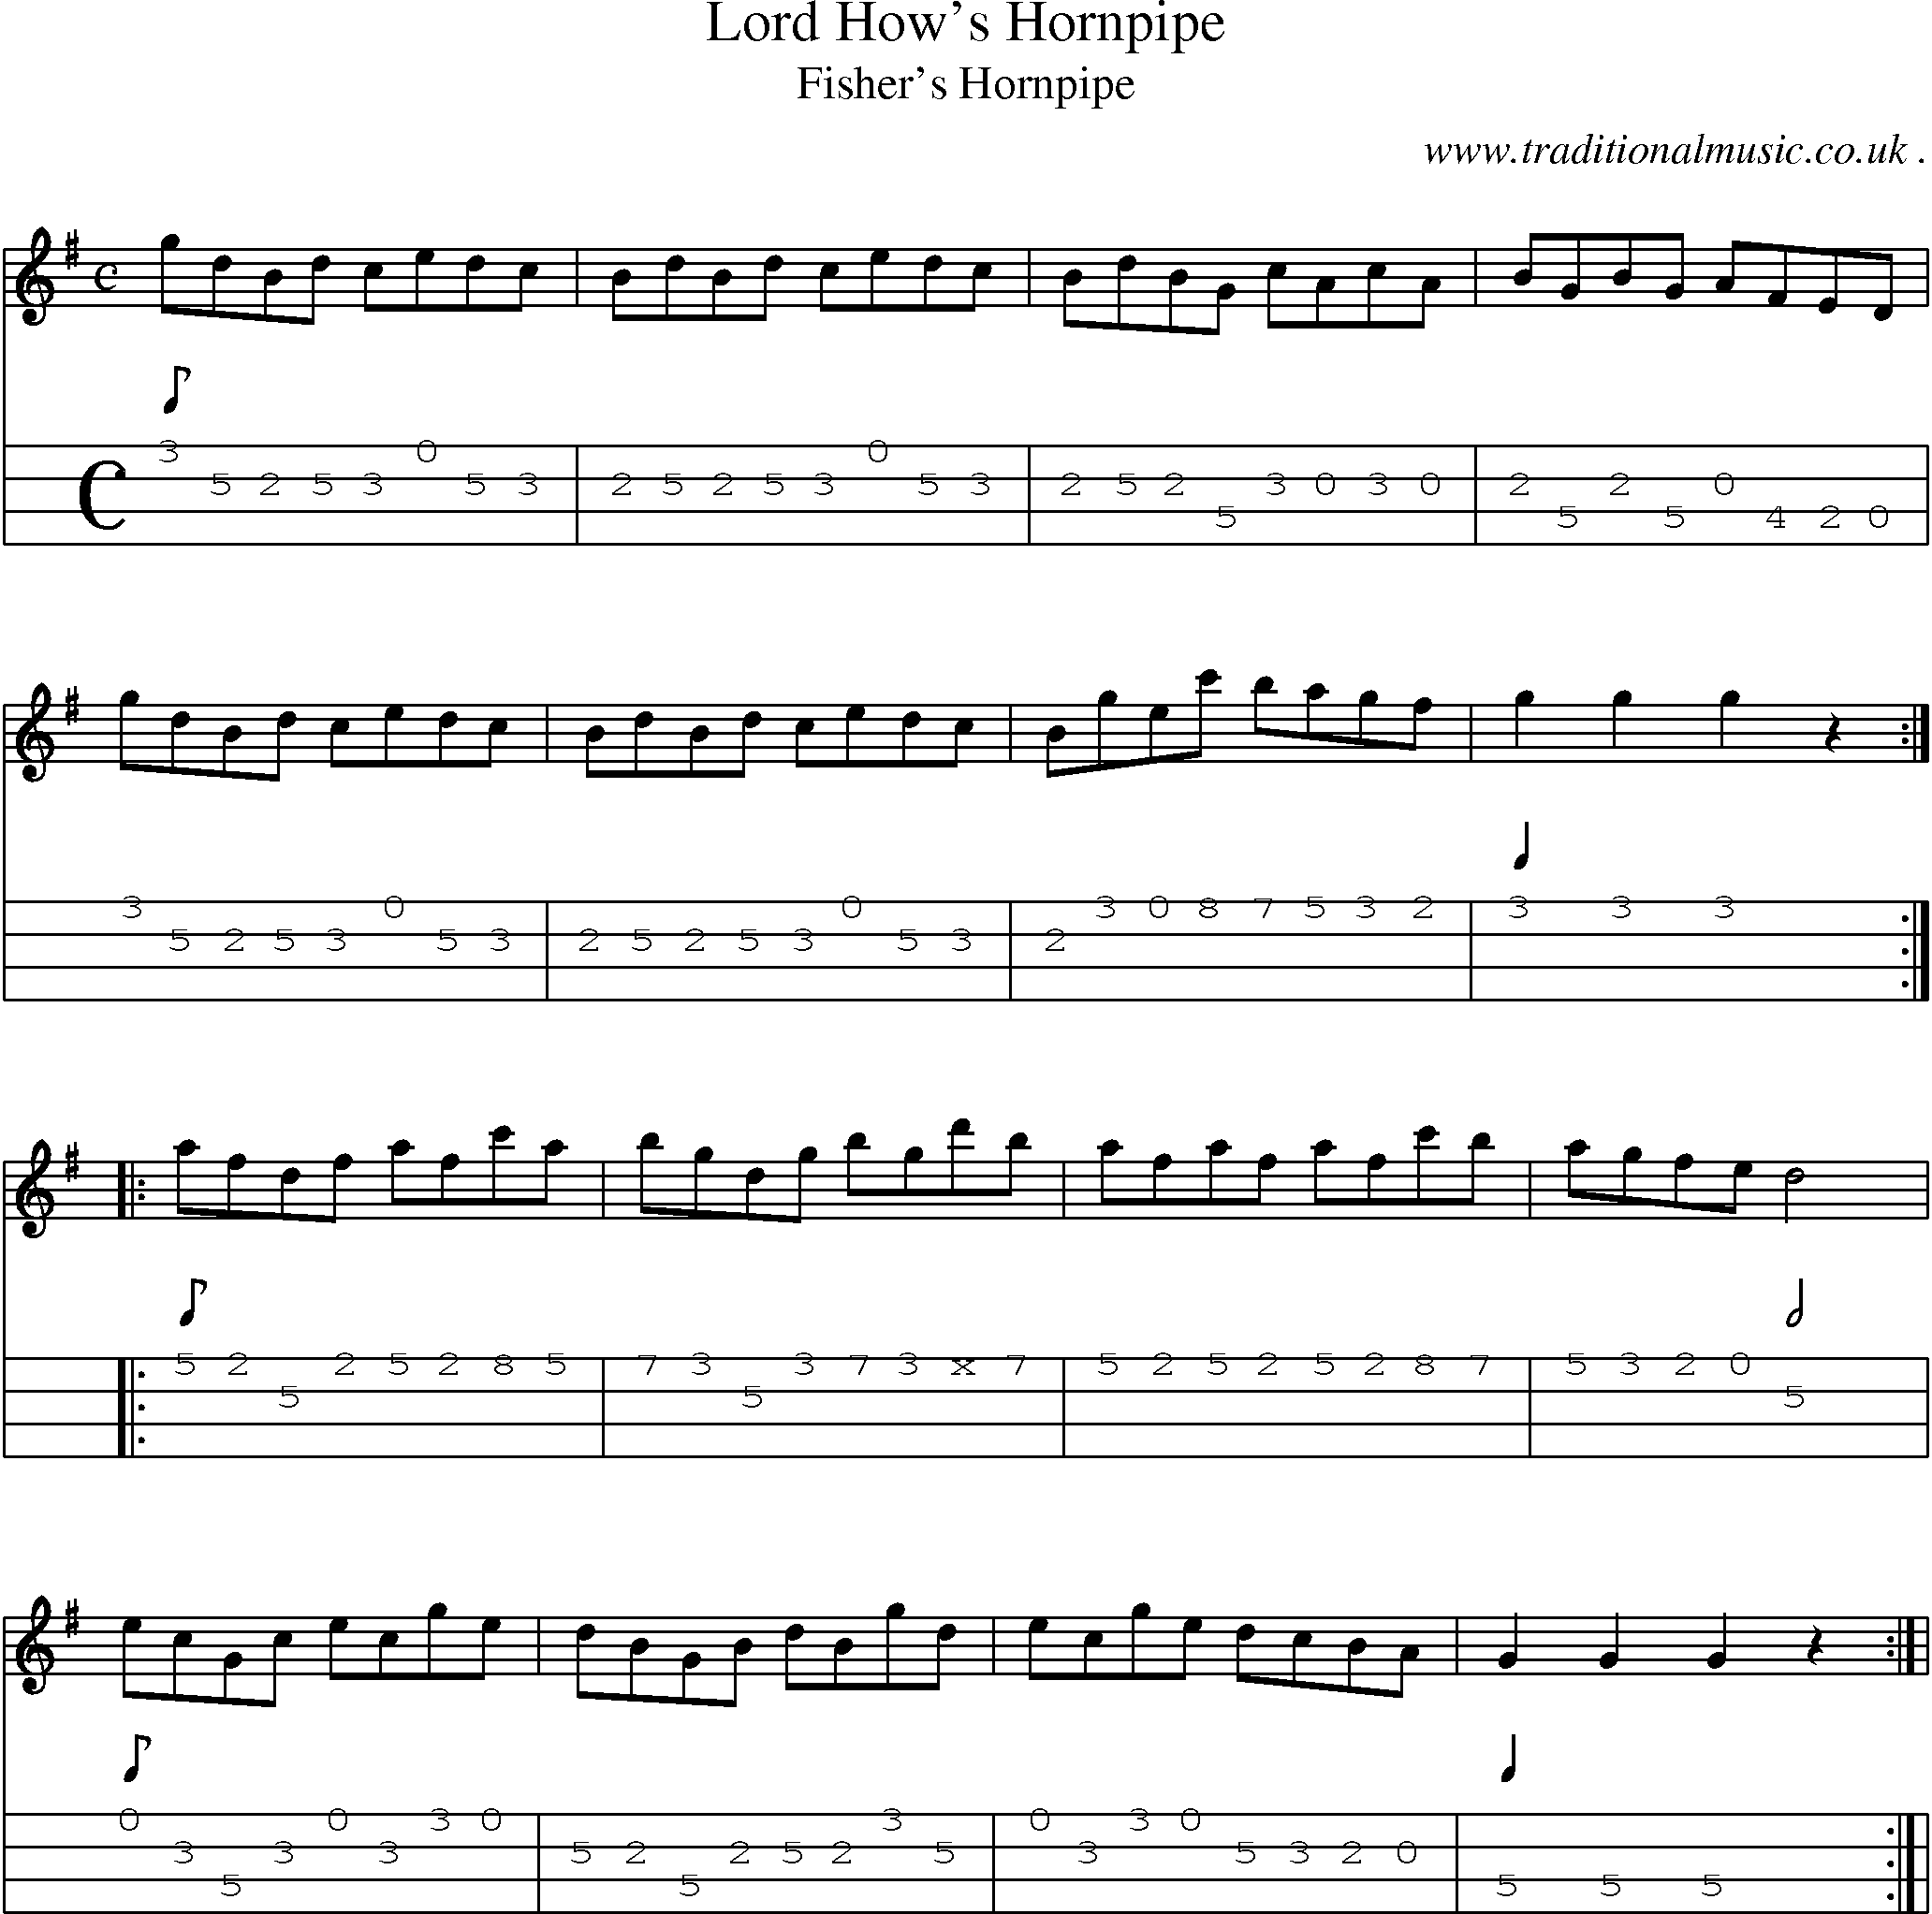 Sheet-Music and Mandolin Tabs for Lord Hows Hornpipe